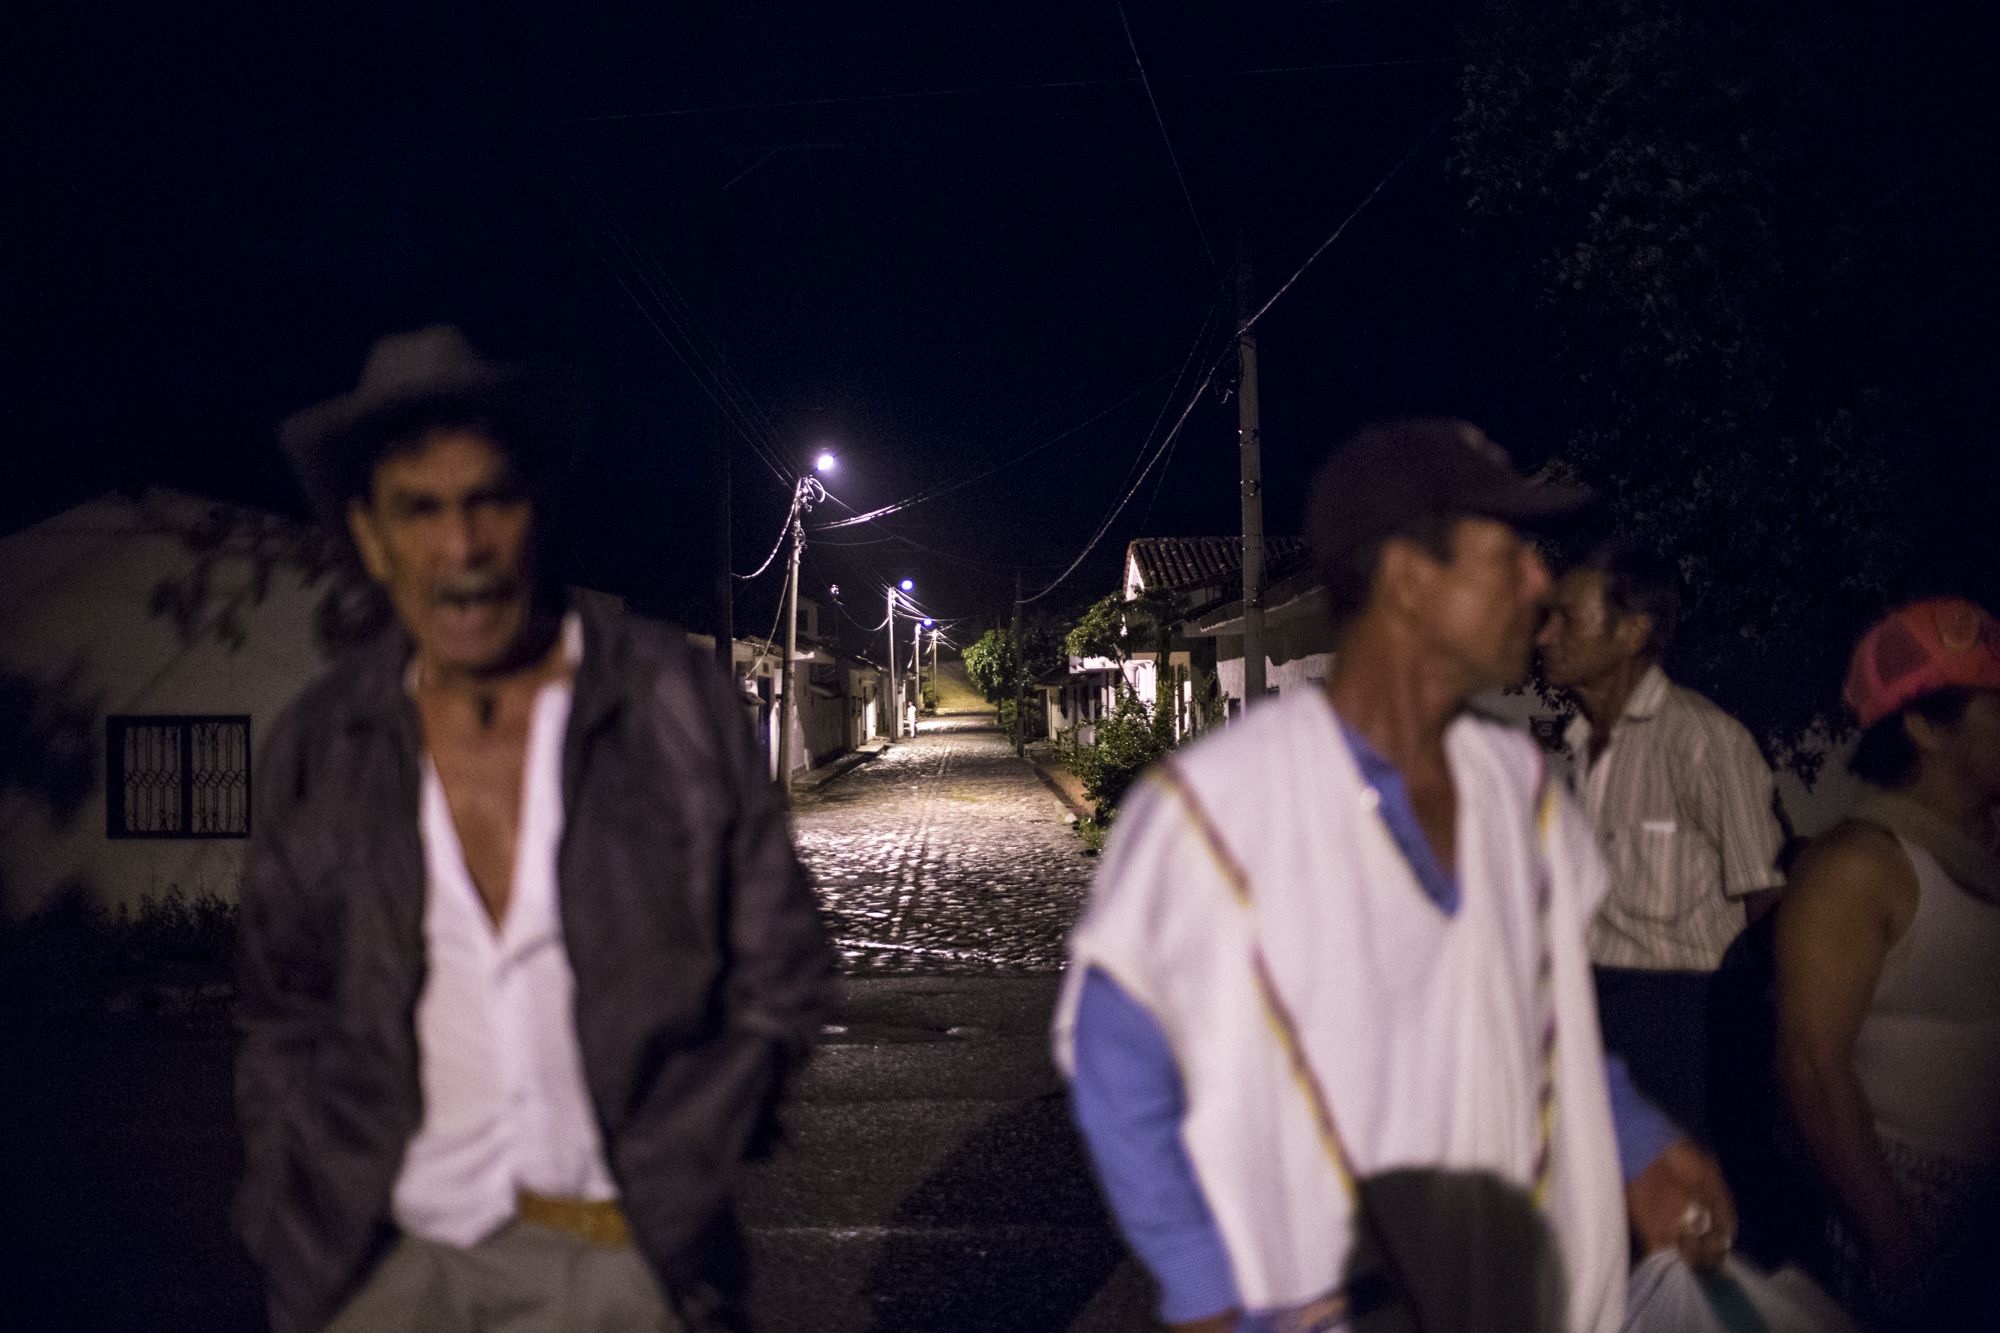     Members of ASOQUIMBO return to their hometown at 3am after a ceremonious homecoming for their battle against the Italian transnational company ENEL which constructed the Quimbo dam on the Magdalena River, displacing some 30,000 farmers and fisher